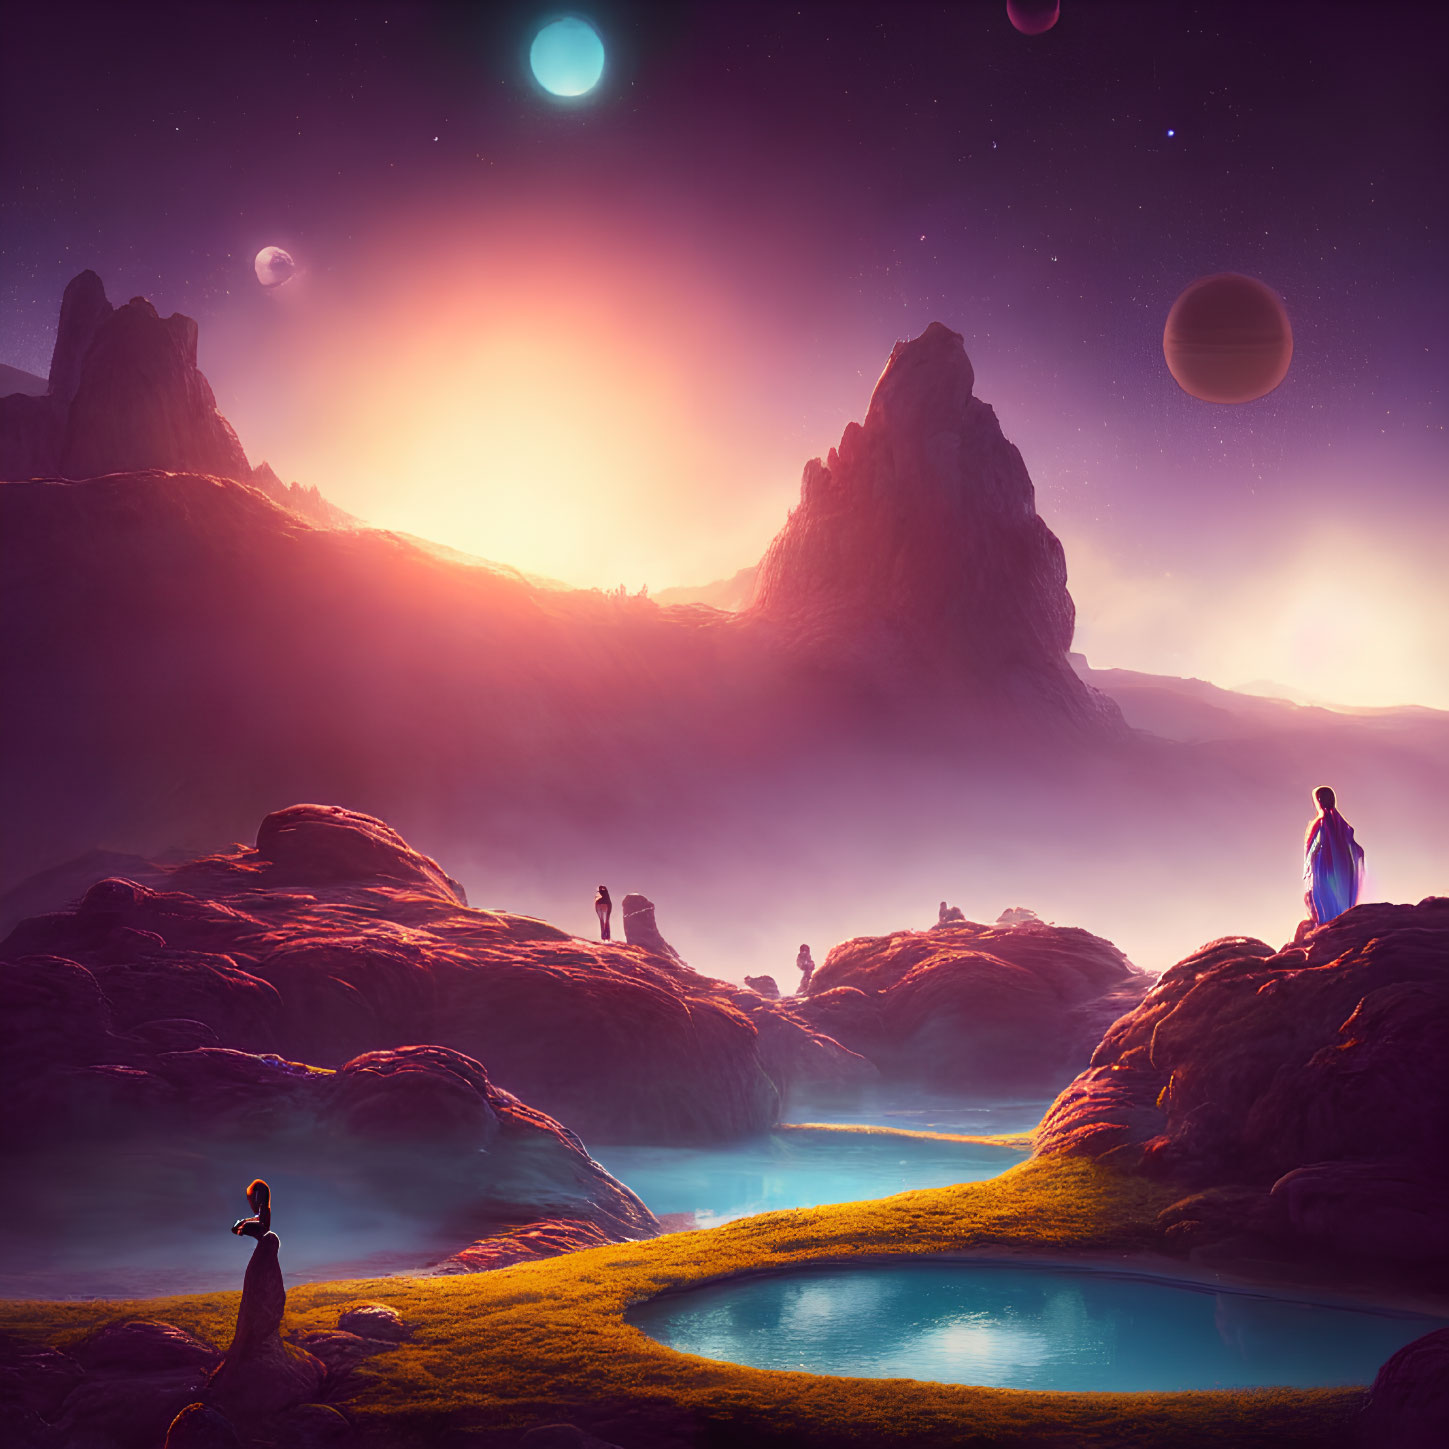 Vibrant skies and celestial bodies in fantastical landscape